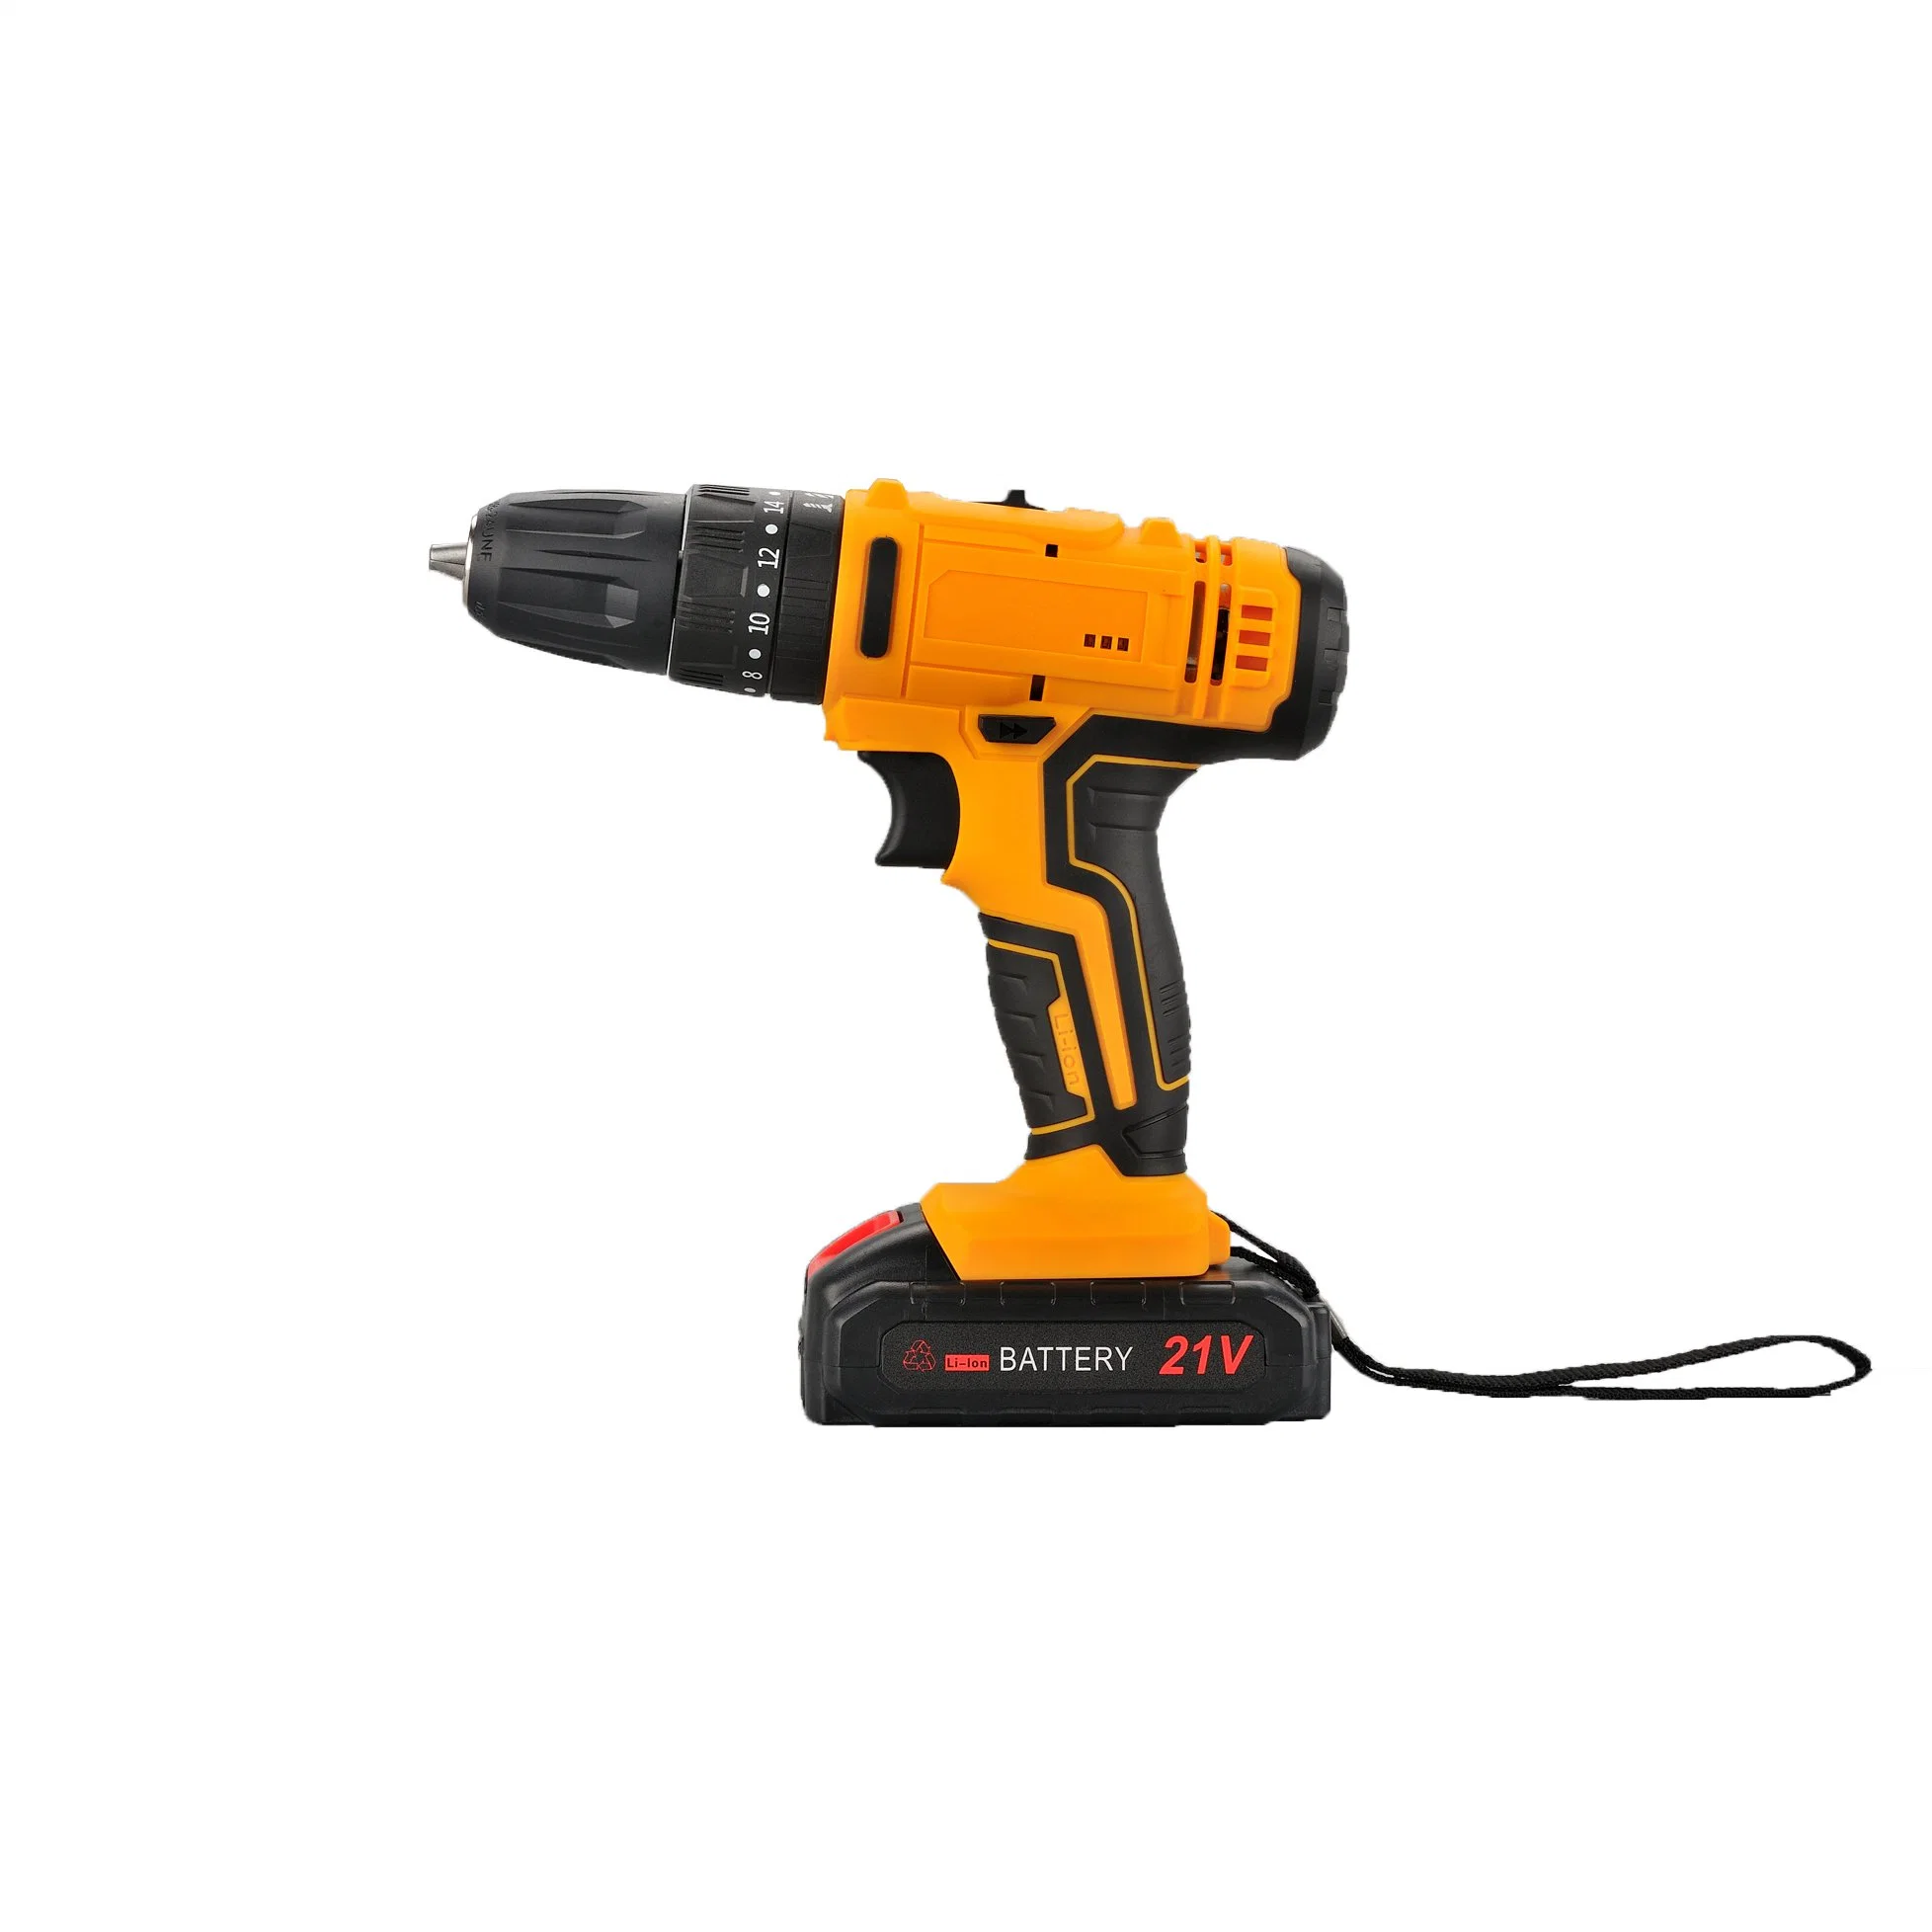 Youwe Cordless Battery Tool Power Tool Hand Drill 2 Speed 18+3 Torque Cordless Impact Drill